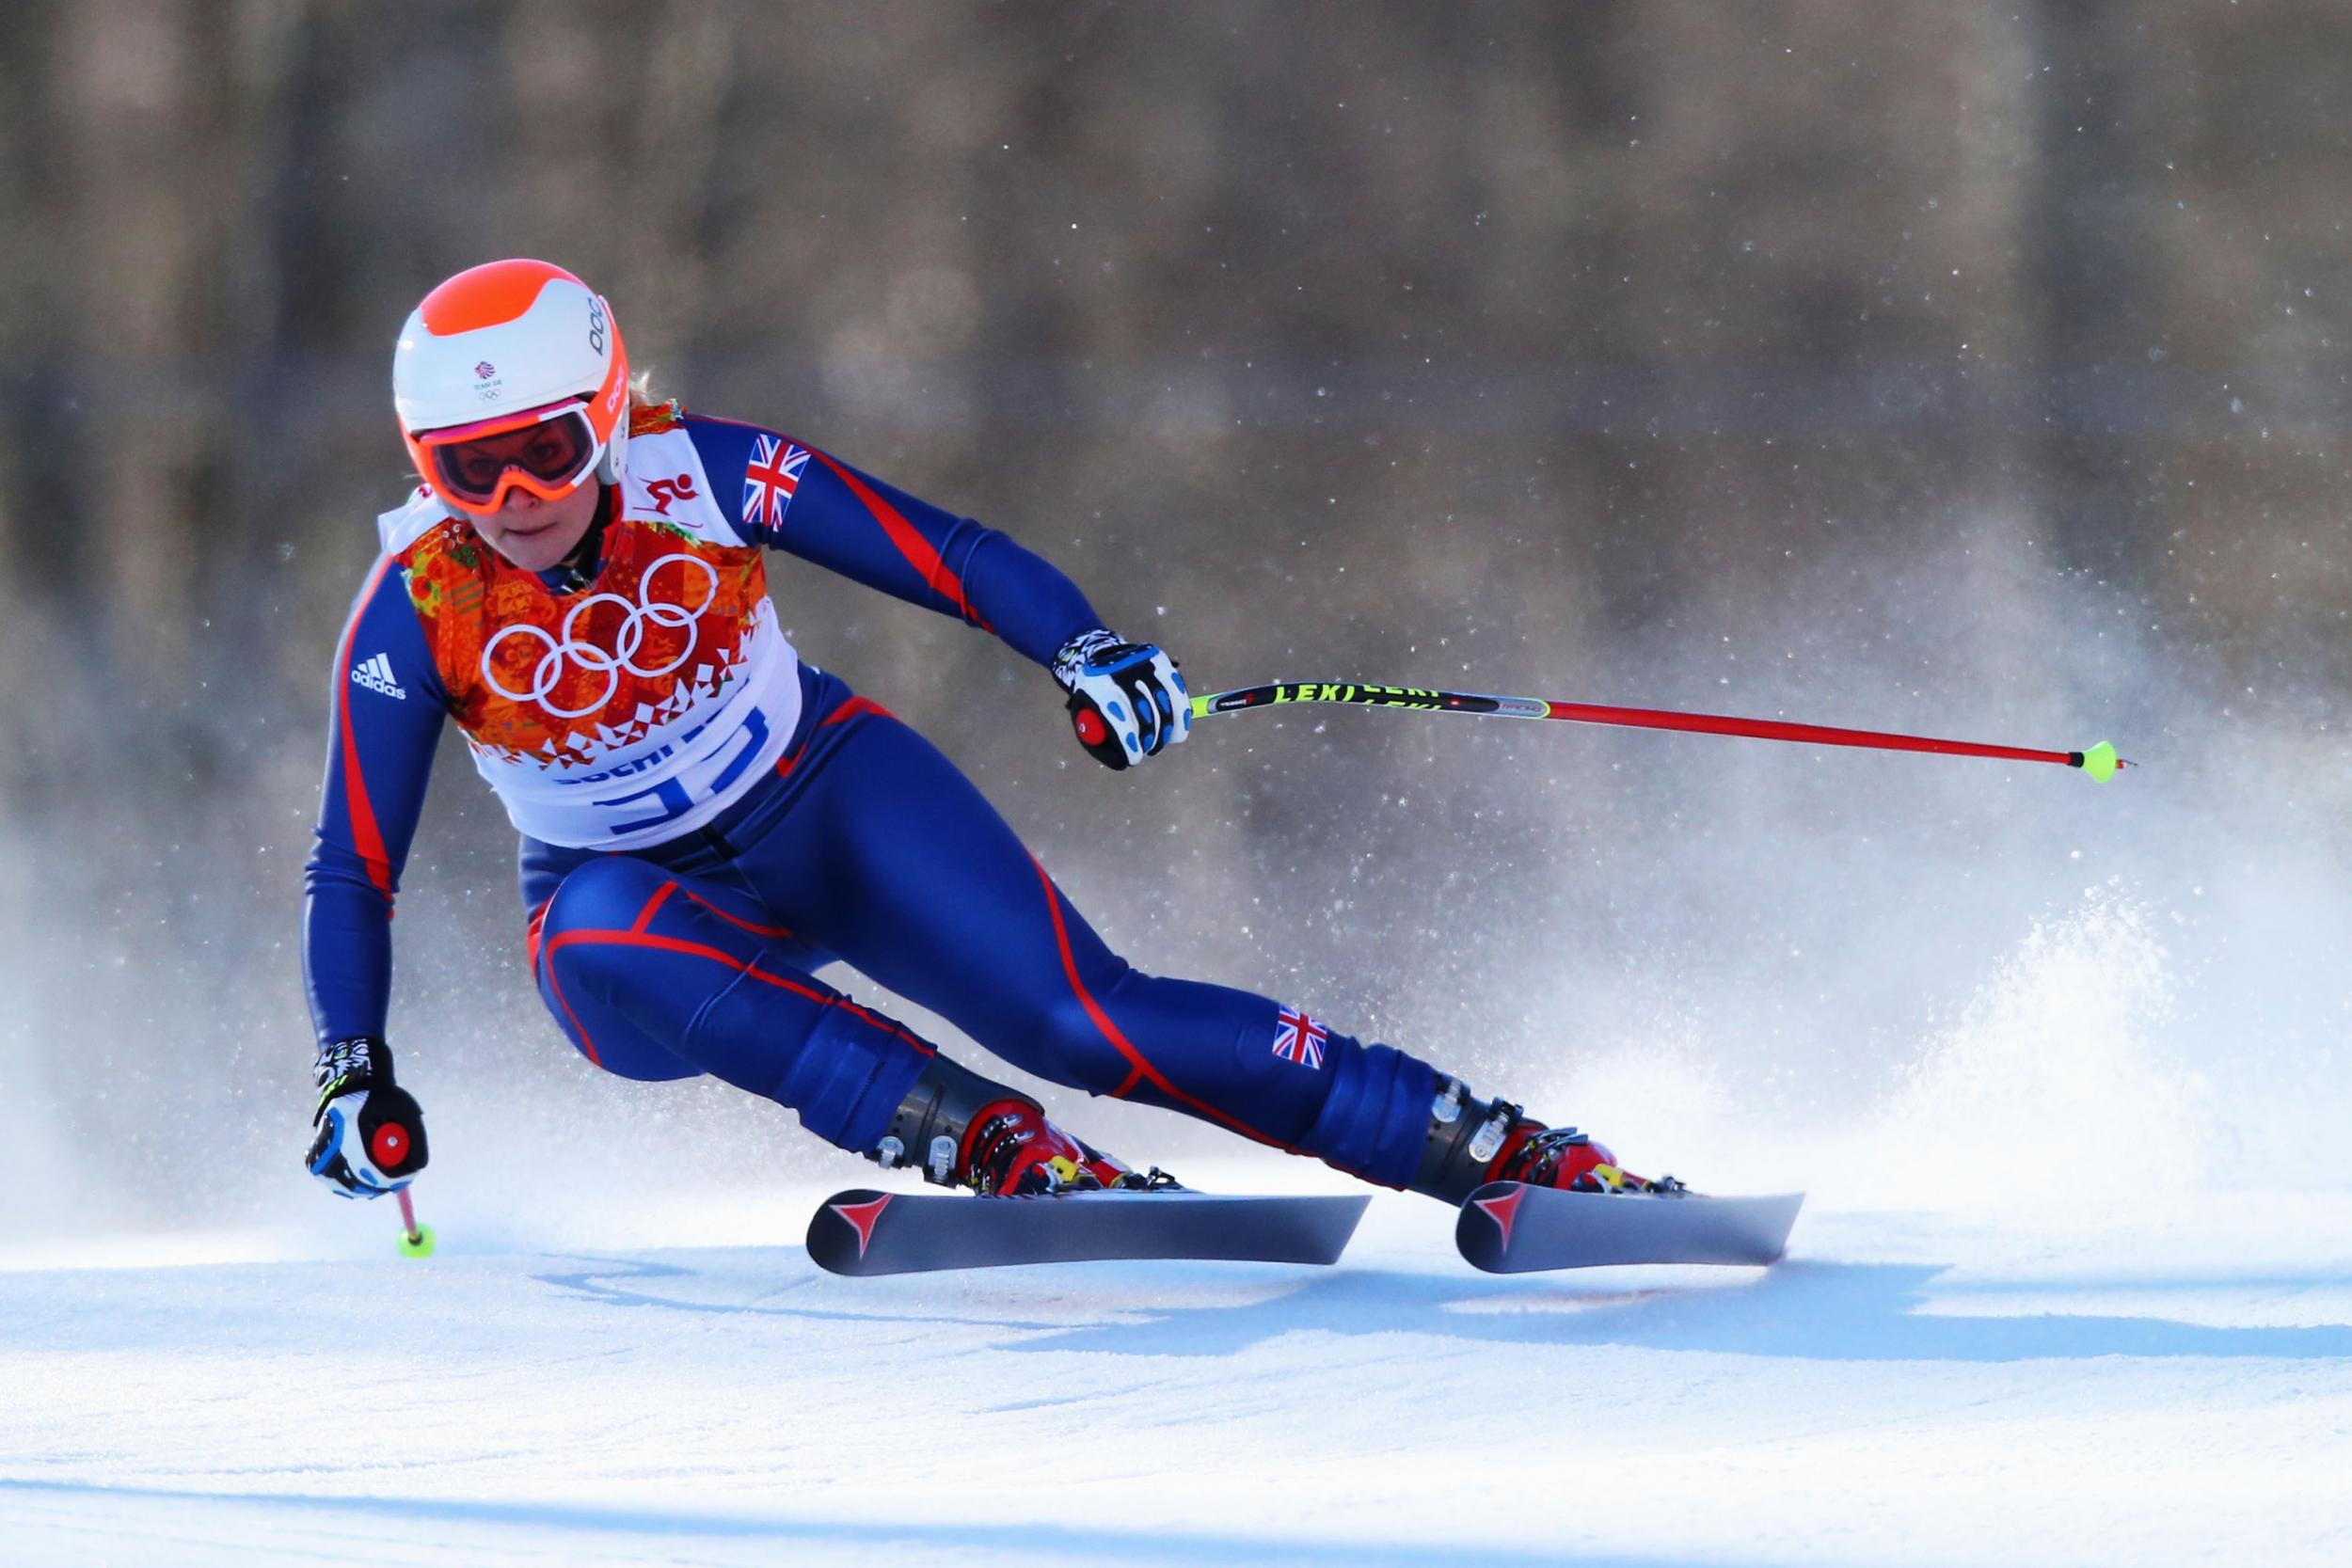 Chemmy Alcott in action at the 2014 Winter Olympics in Sochi (Getty)